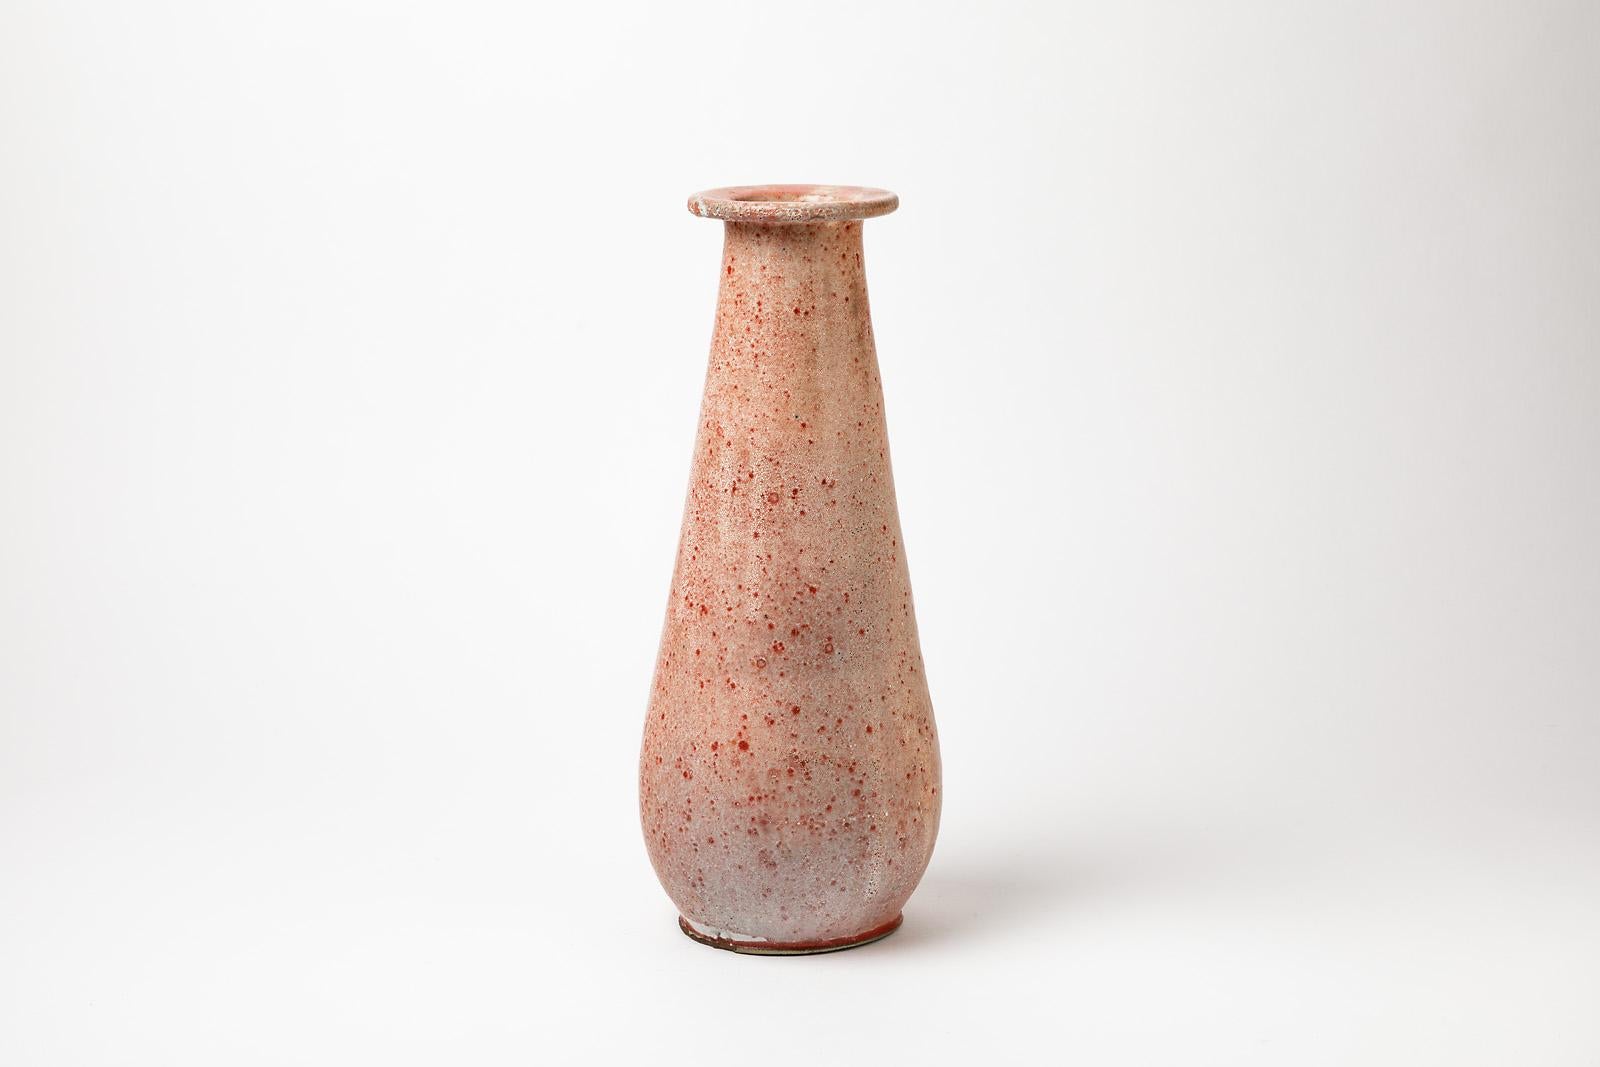 Attributed to Jacques Lenoble

Elegant ceramic vase with pink ceramic glaze color.

Beautiful handmade form typical from the 1930s.

Signed J under the base.

Dimensions: 34 x 13 x 13cm.